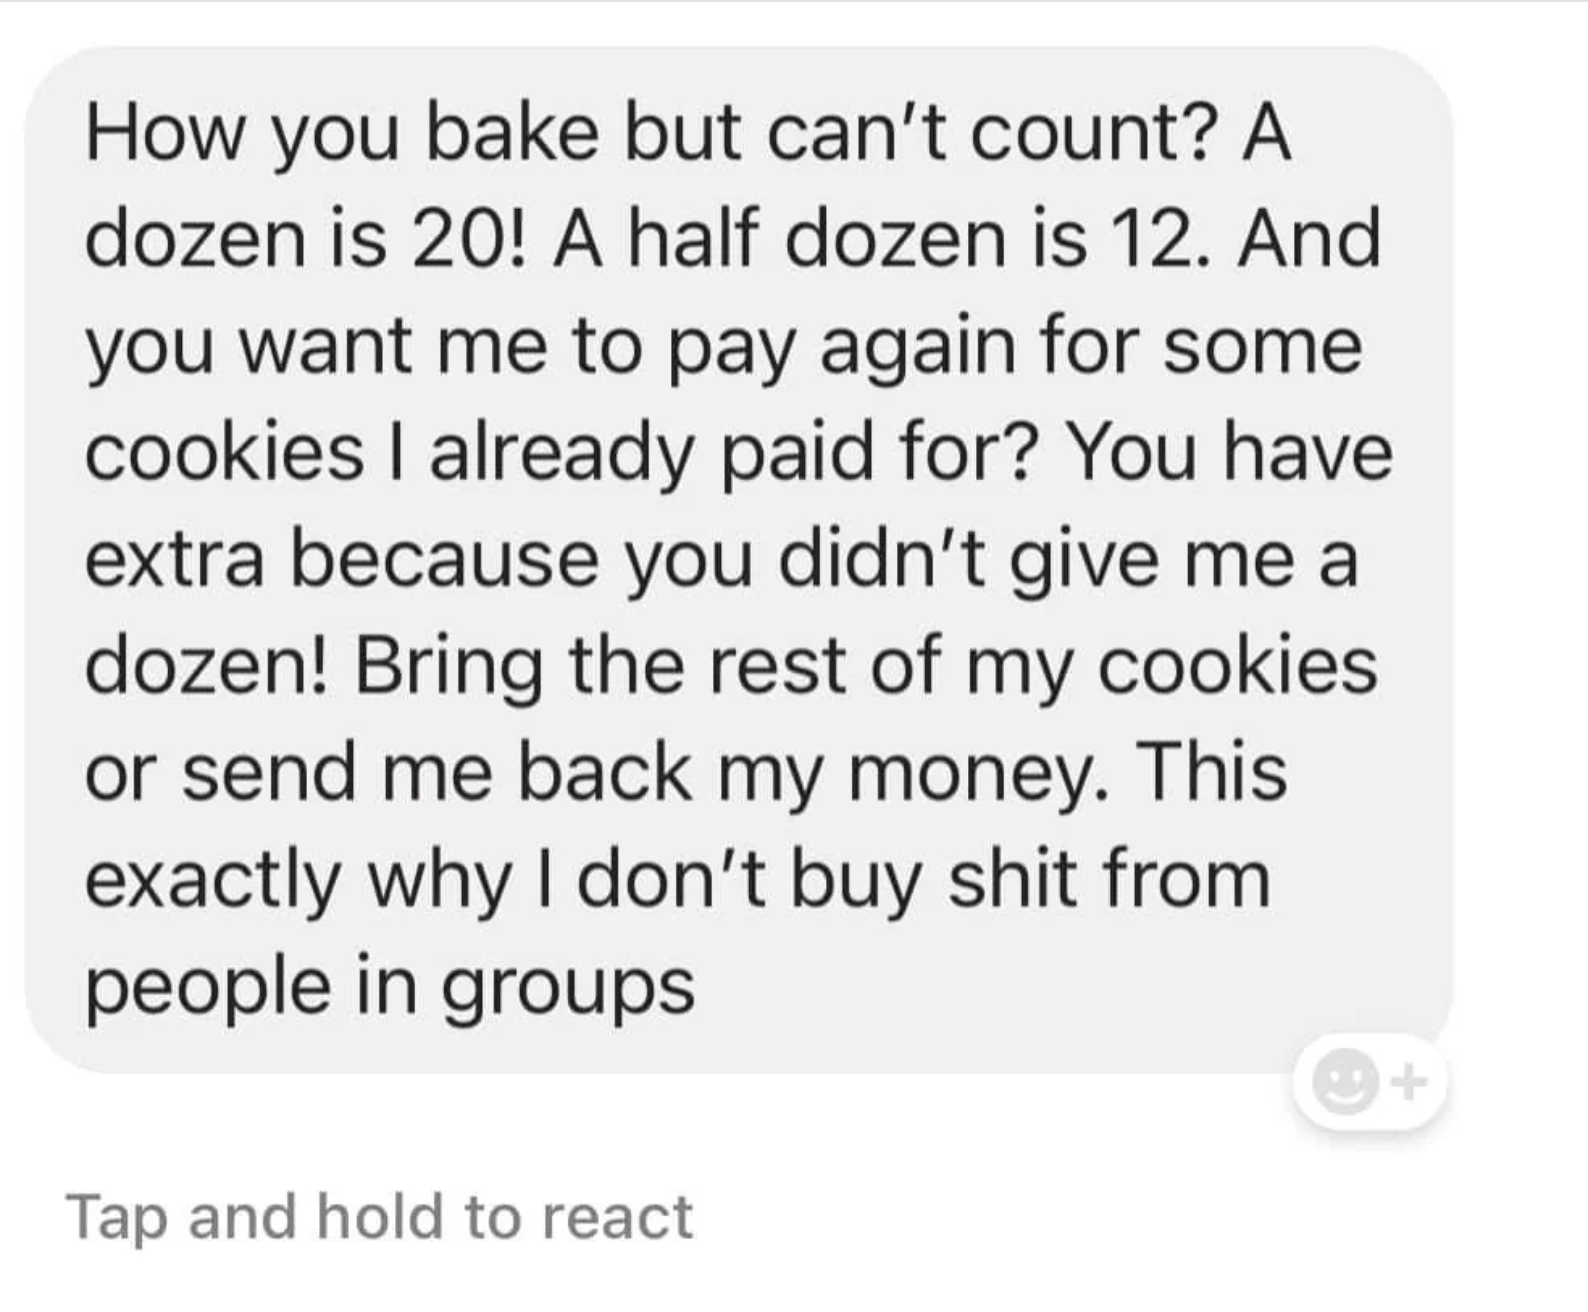 A text message complaint where a customer claims they received 20 cookies instead of 12, and expresses frustration over being asked to pay again